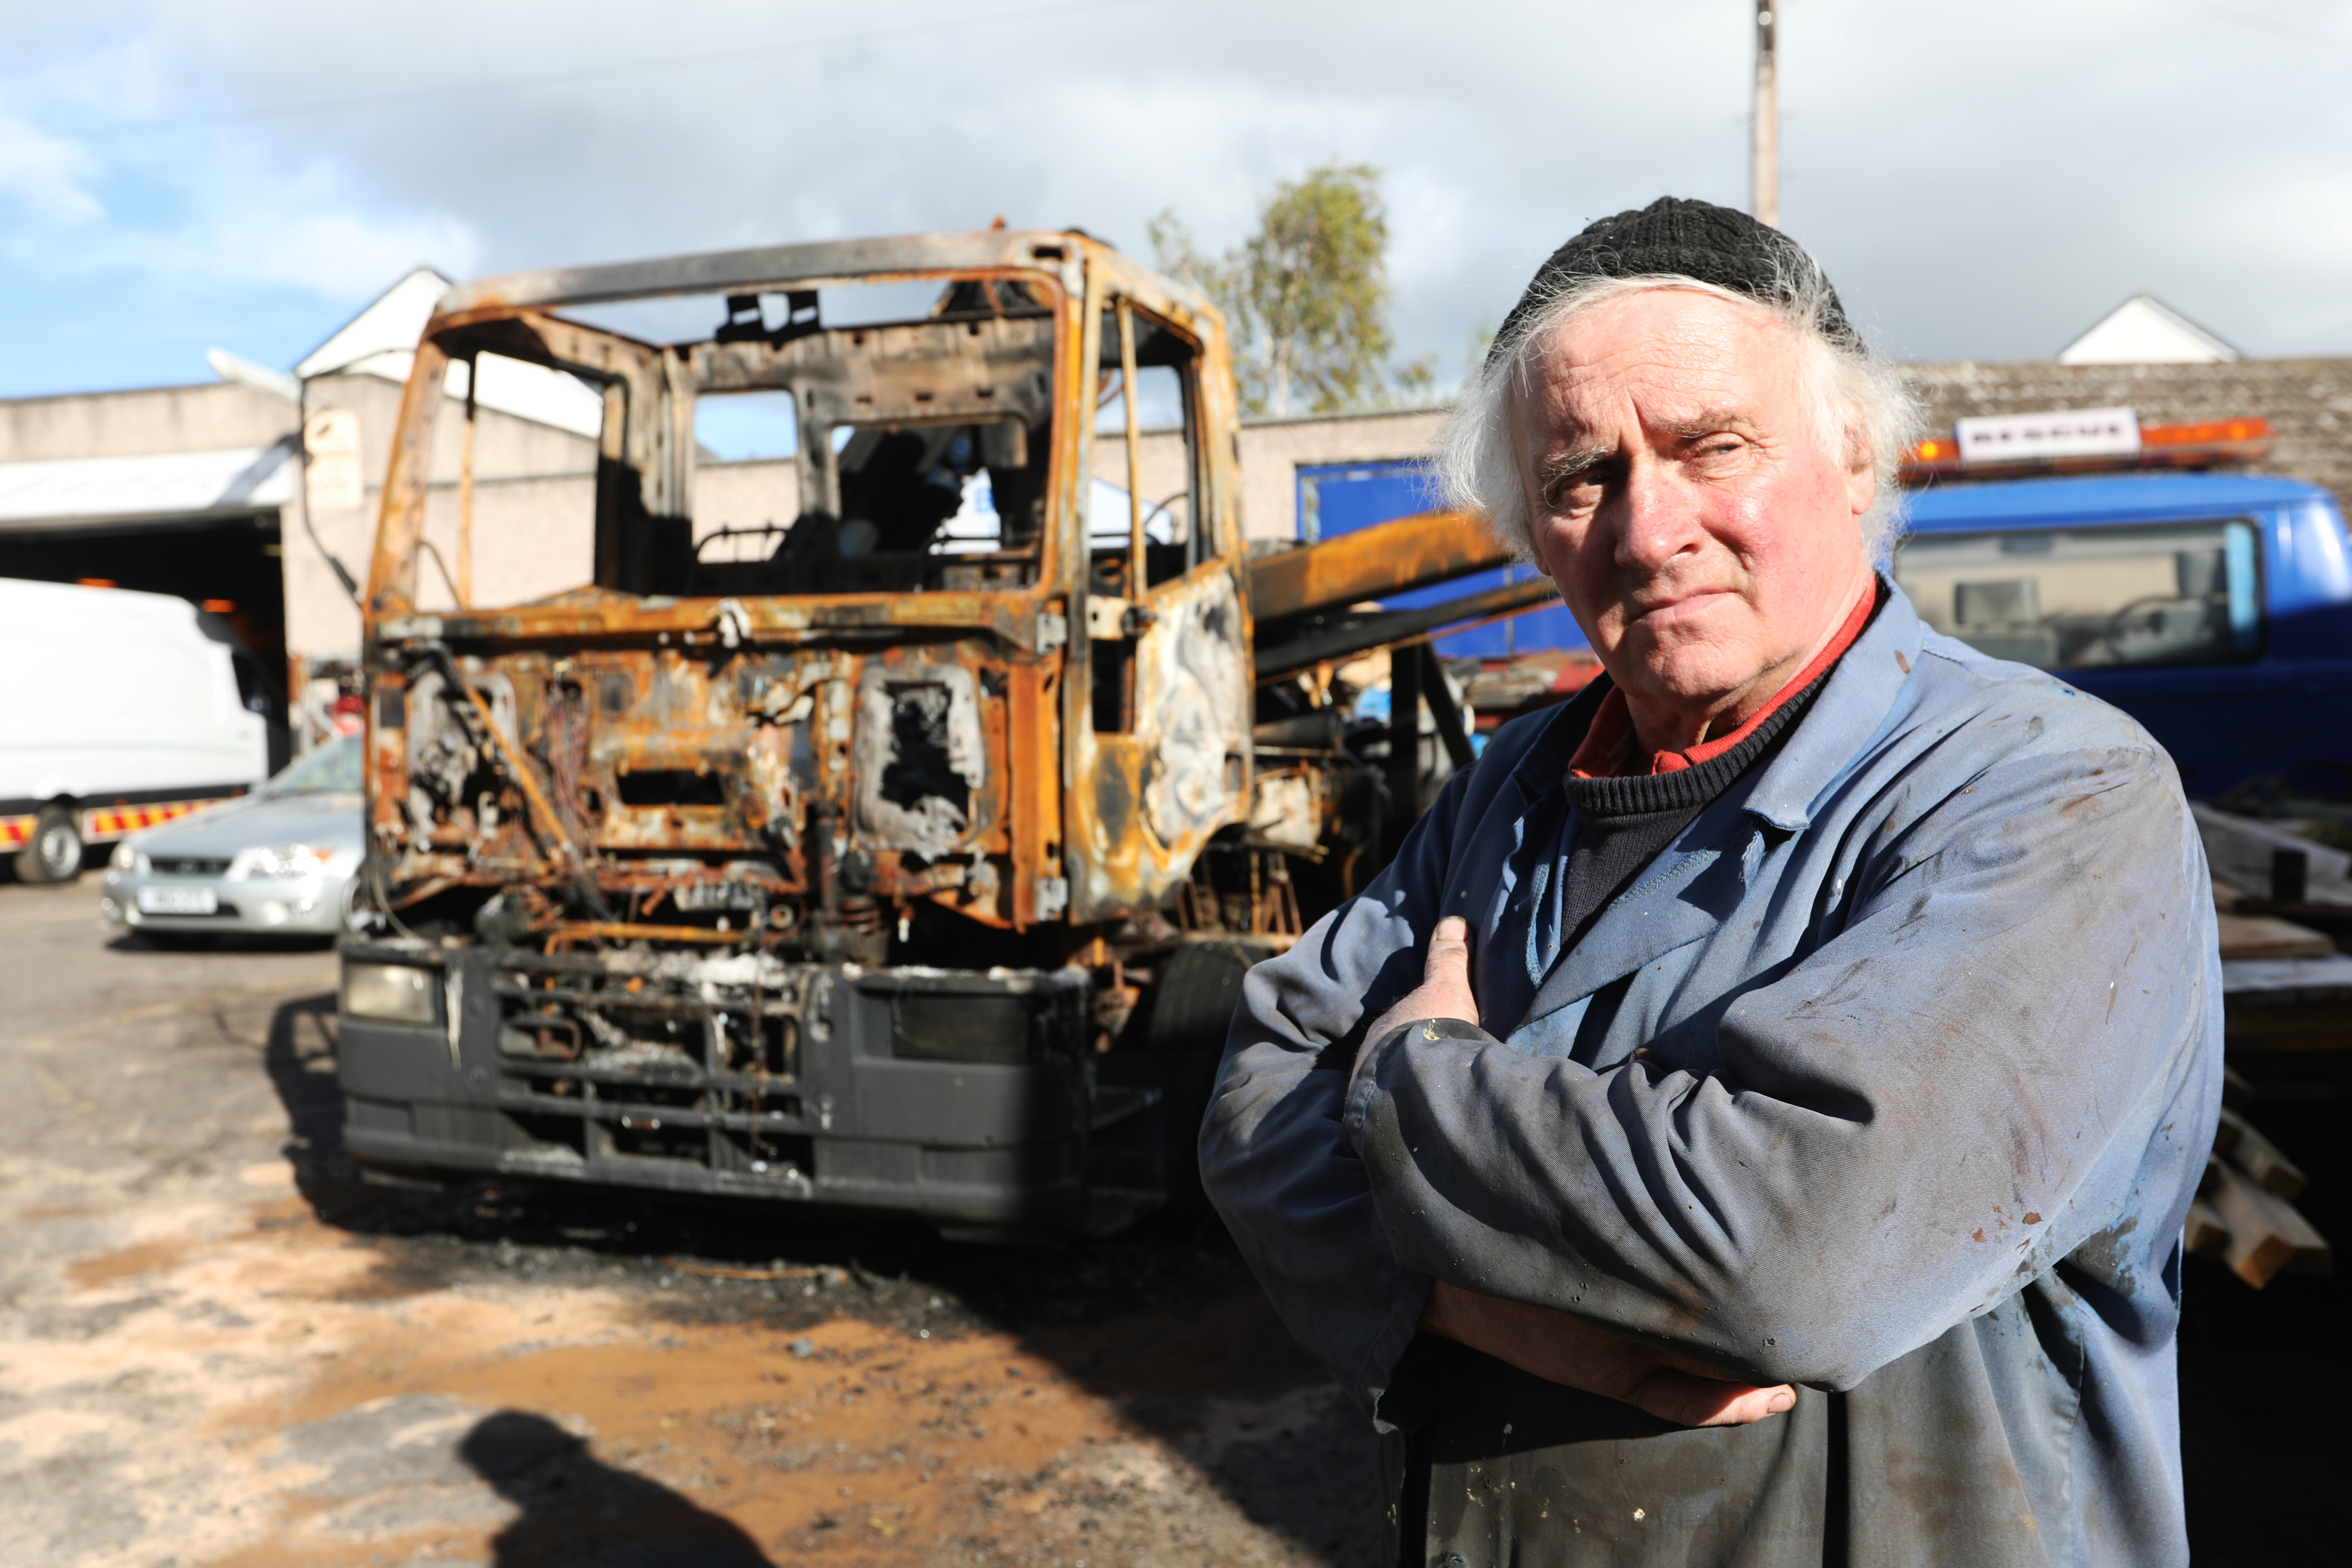 Owner of Bolts garage Bob Coote with the burnt out recovery truck.